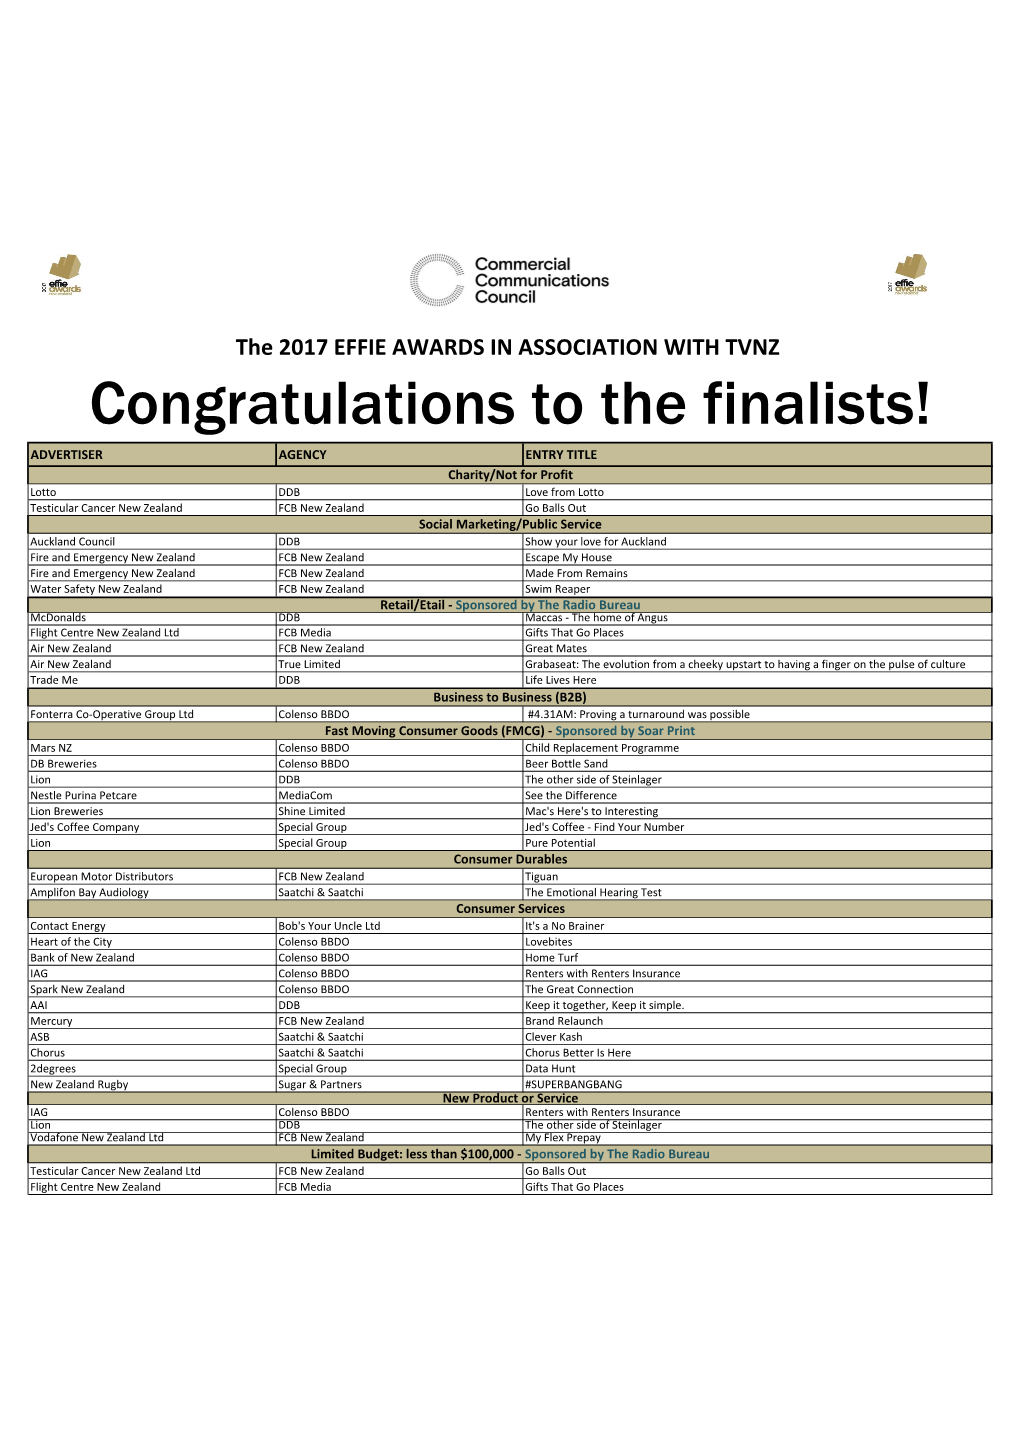 Congratulations to the Finalists!